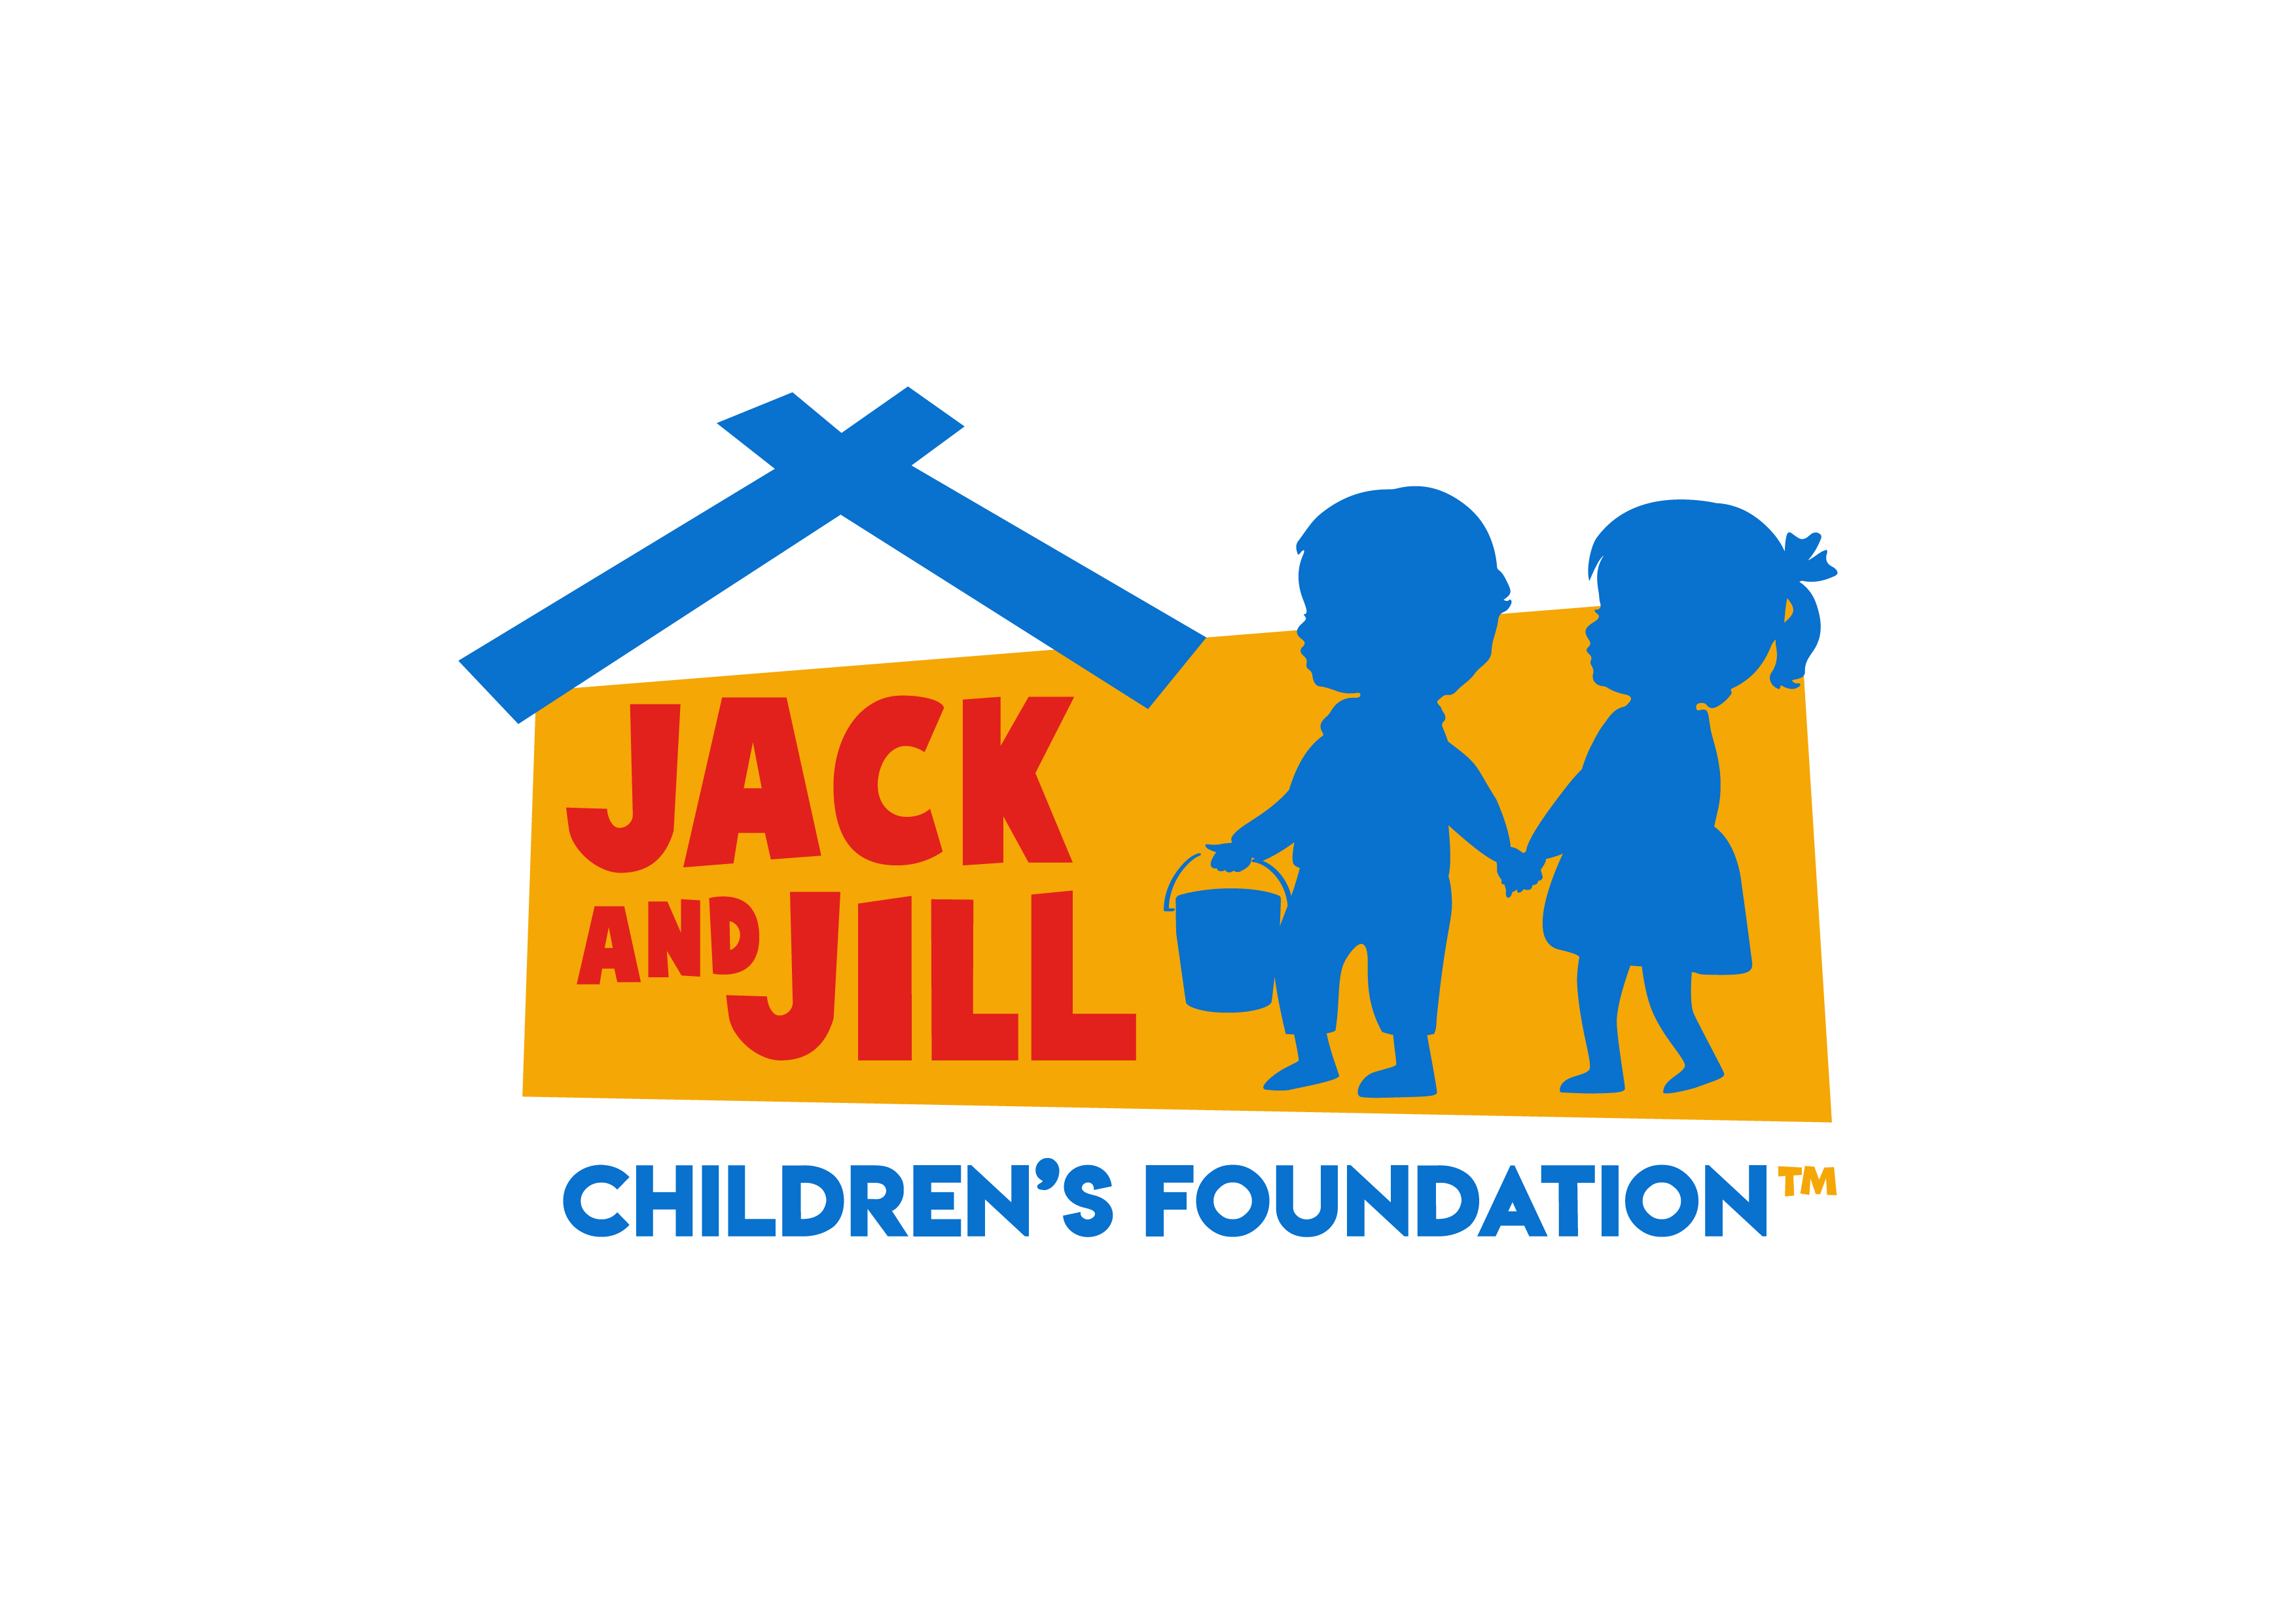 the Jack and Jill Children's Foundation logo